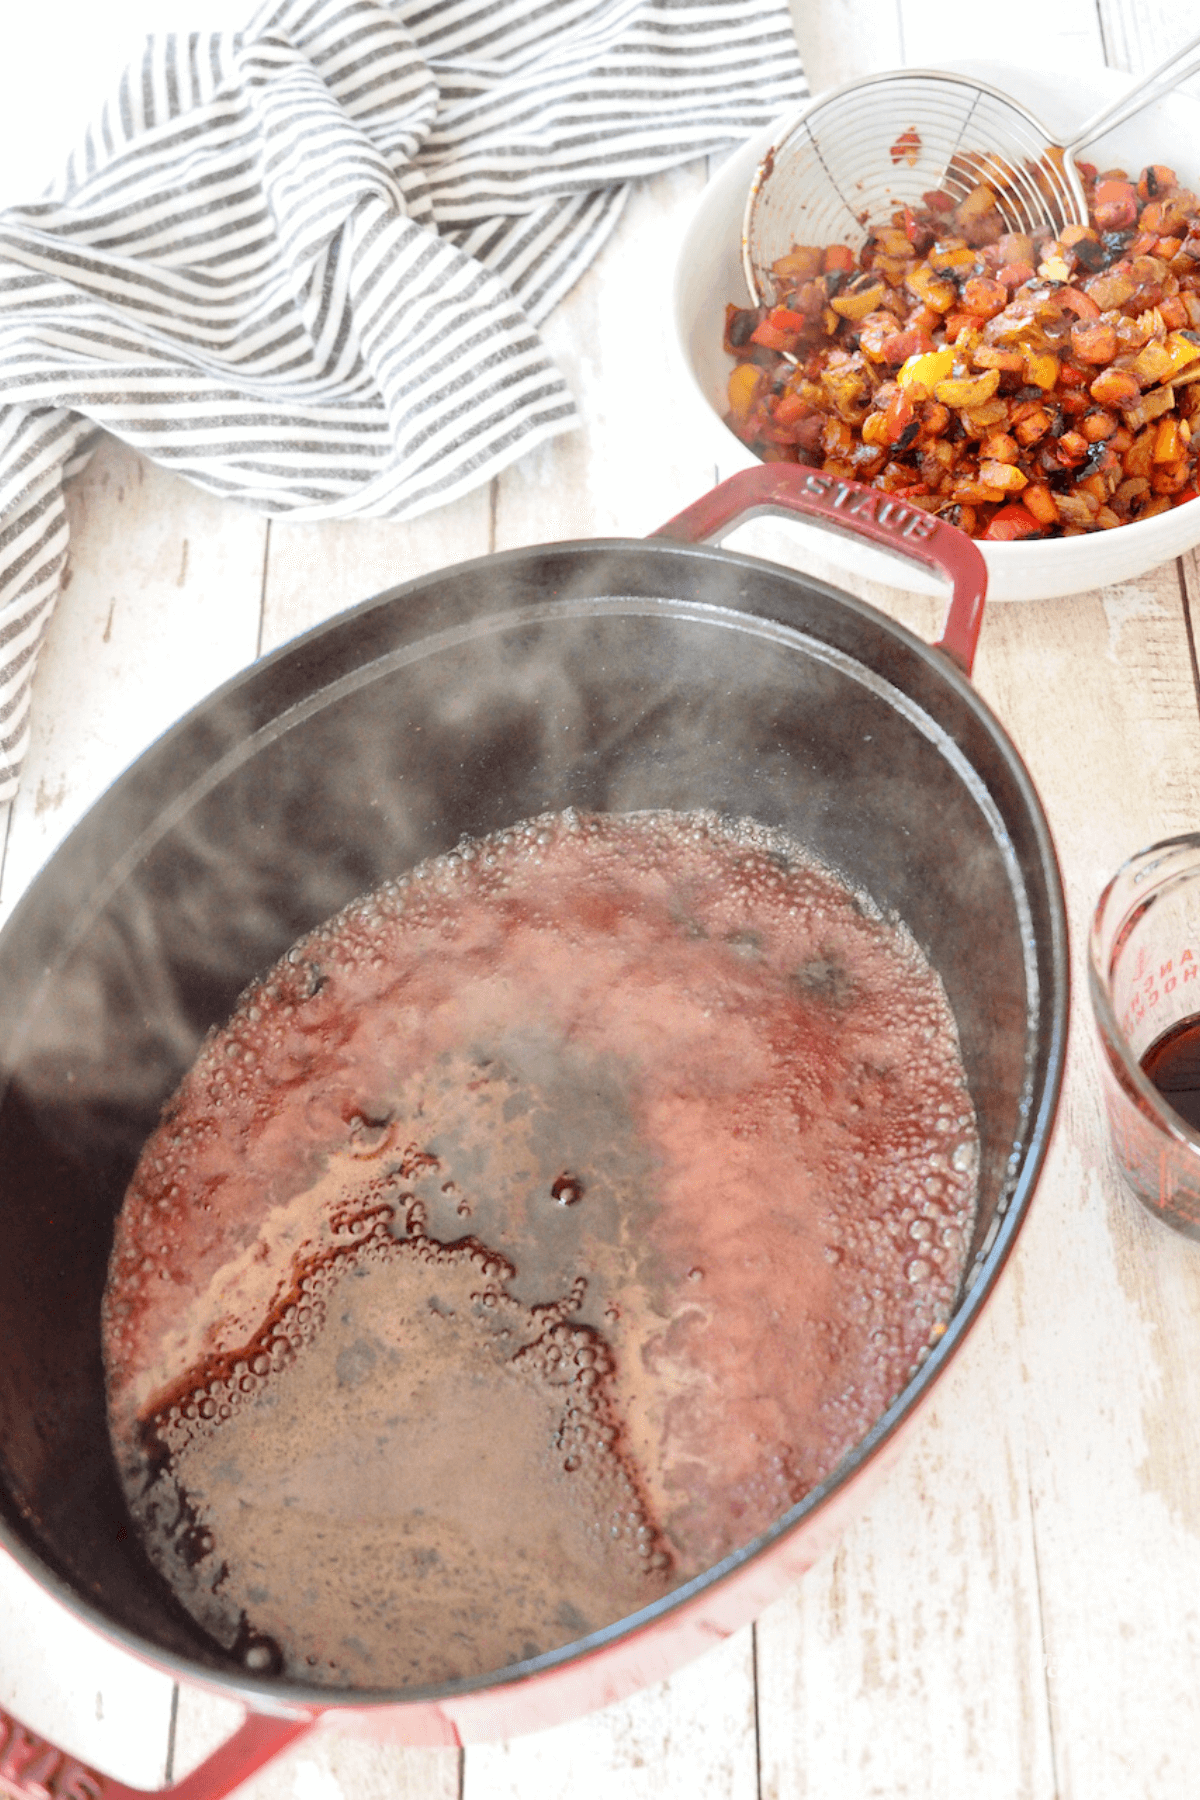 Deglazing pan with red wine. 